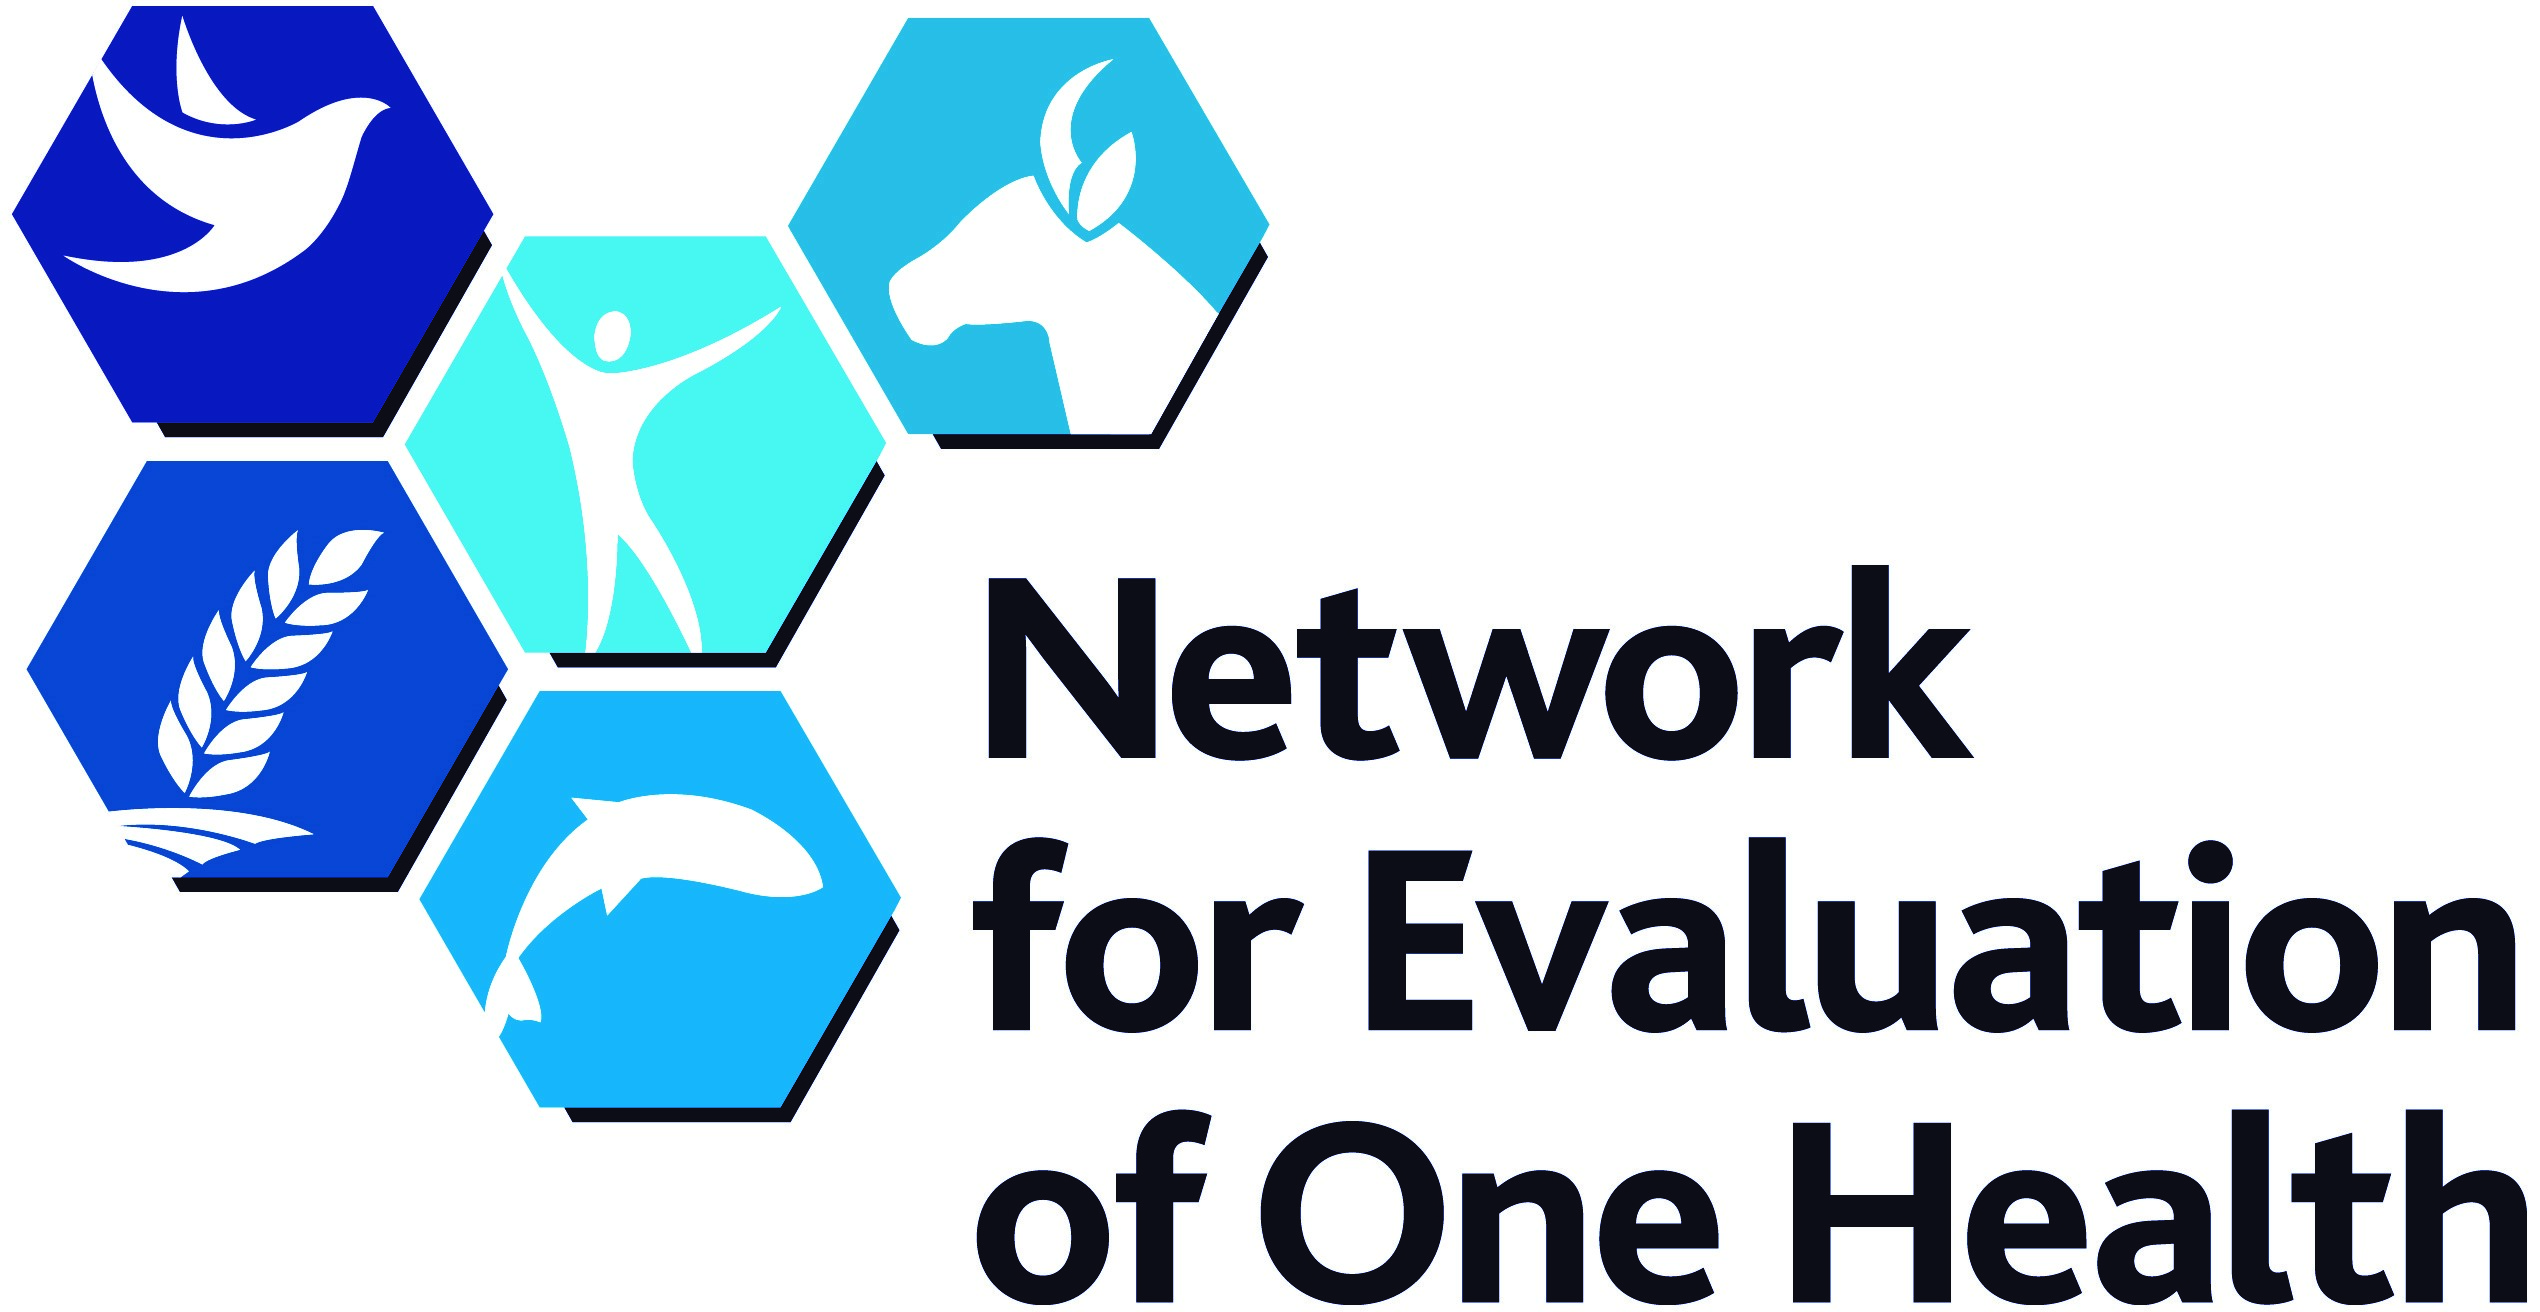 Network for Evaluation of One Health